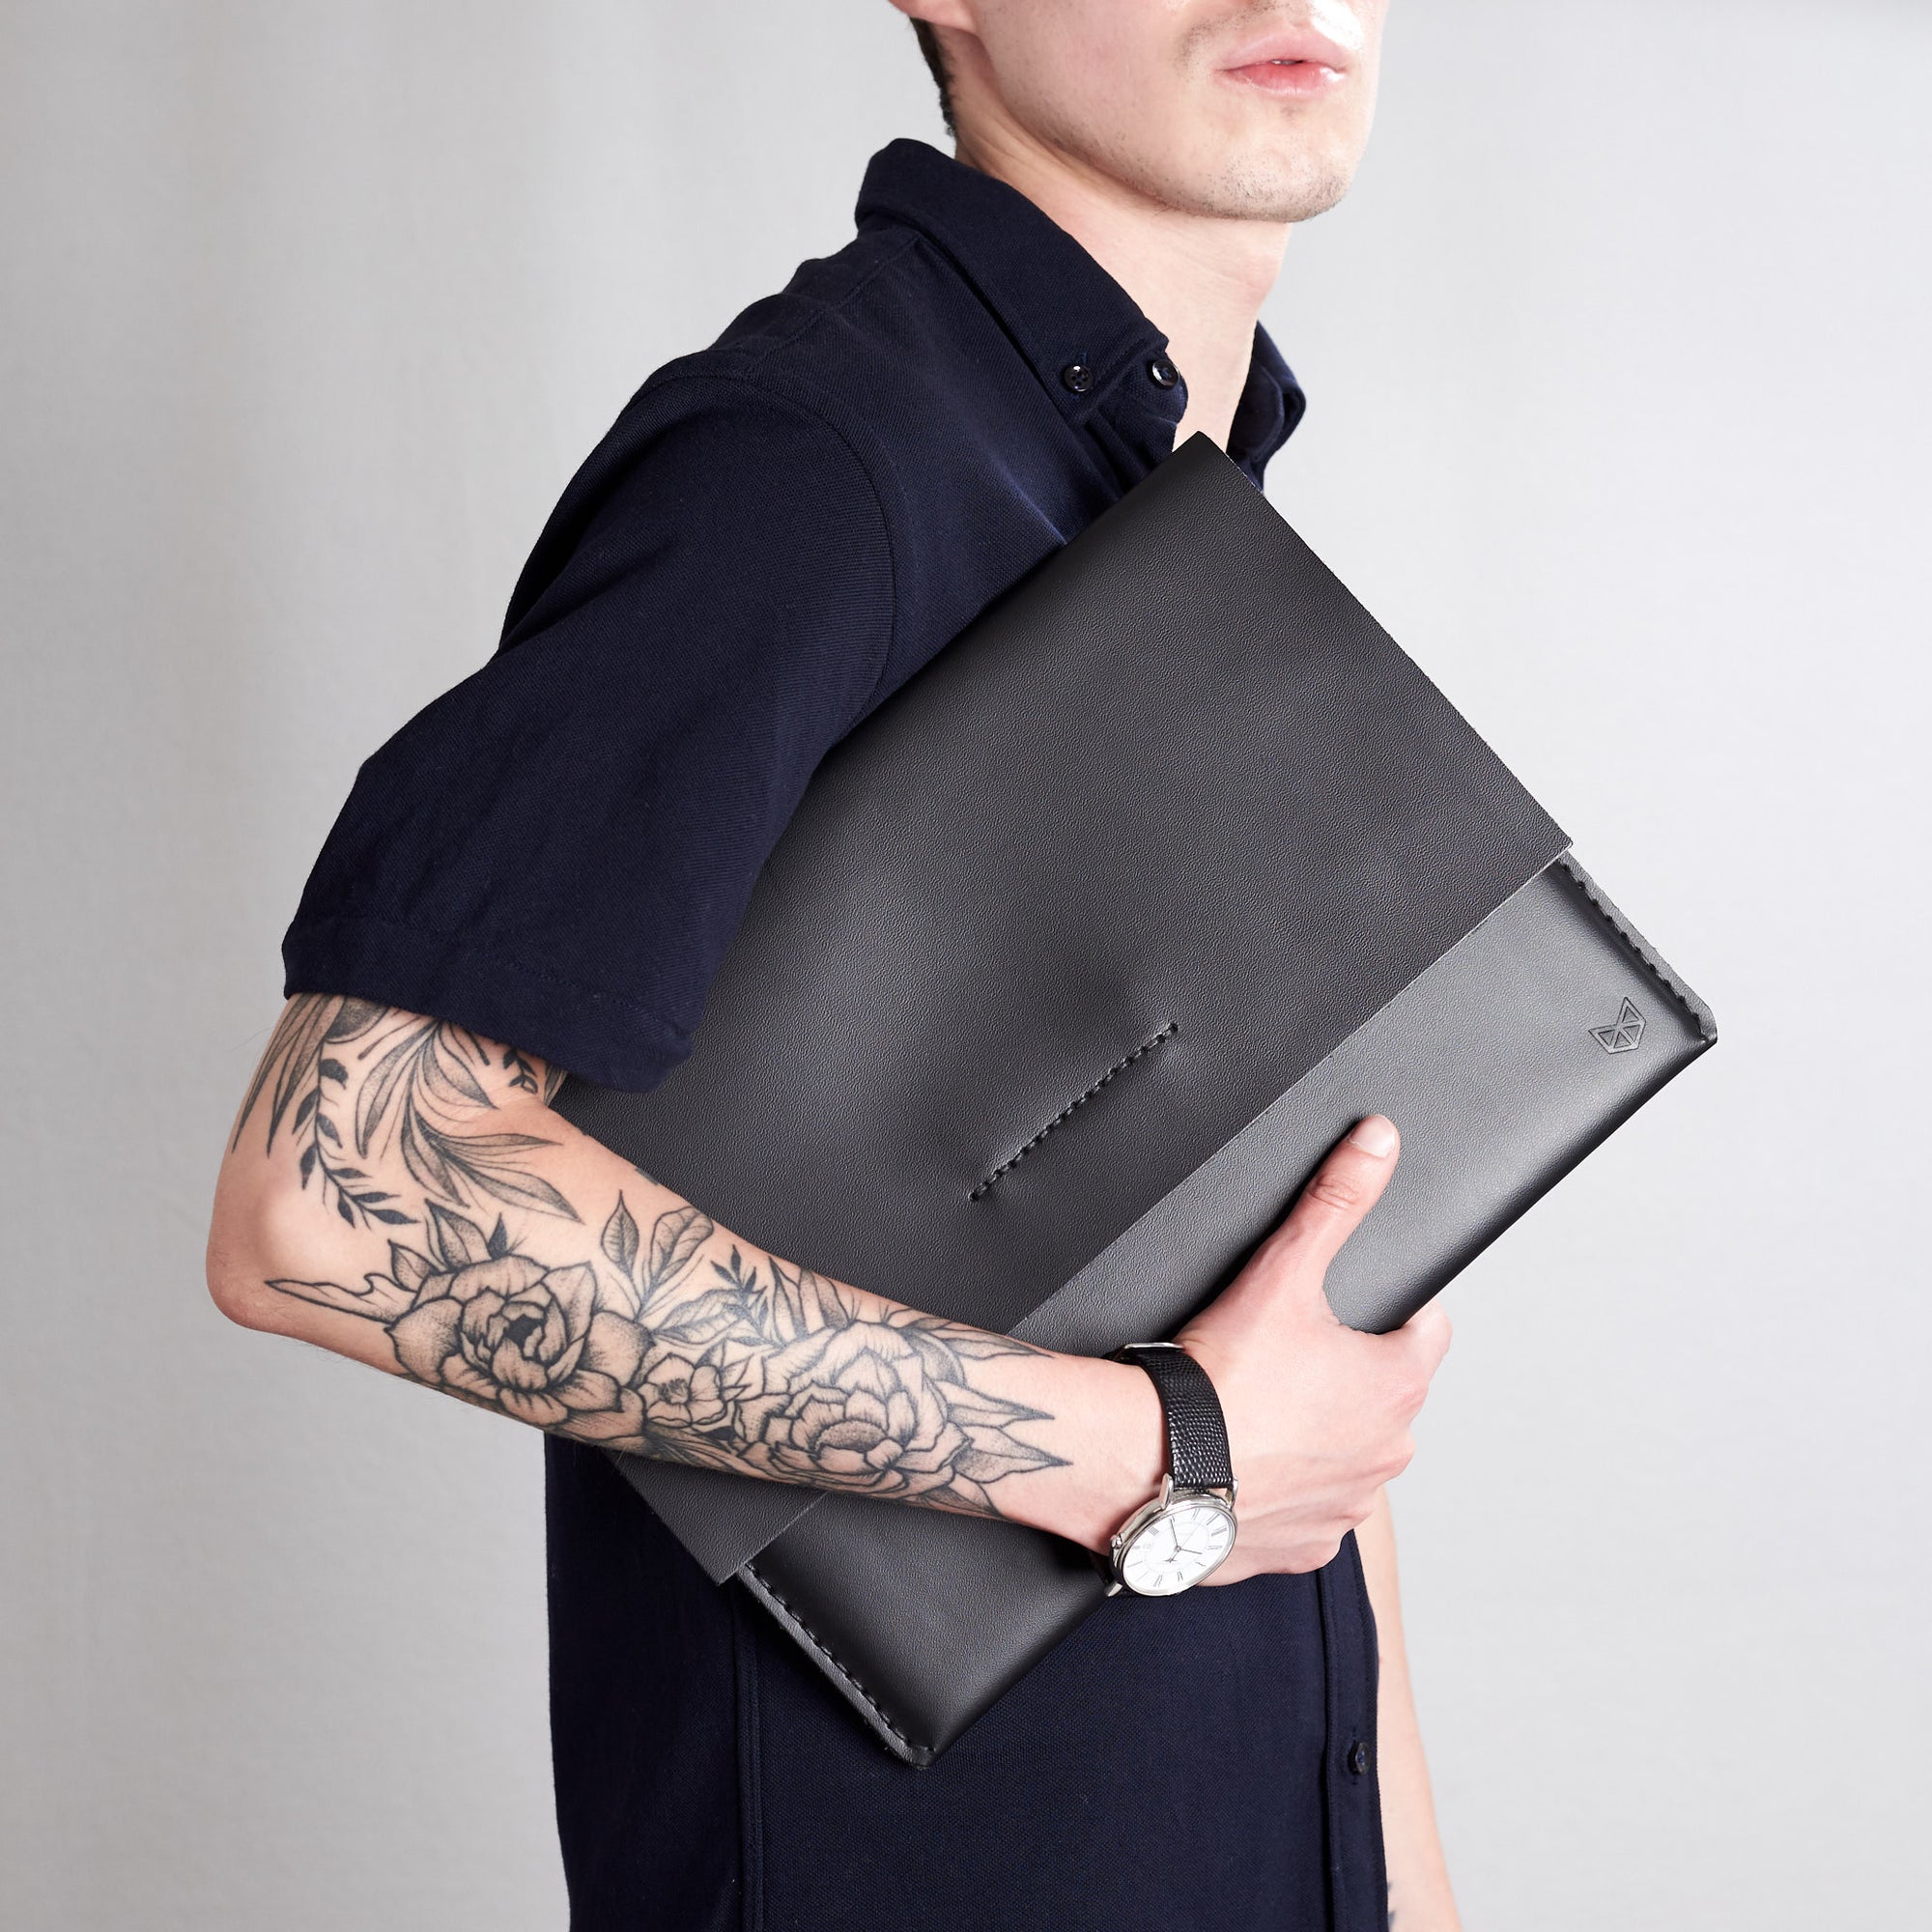 Style front view. Black draftsman 1 case by Capra Leather. Microsoft Surface sleeve.